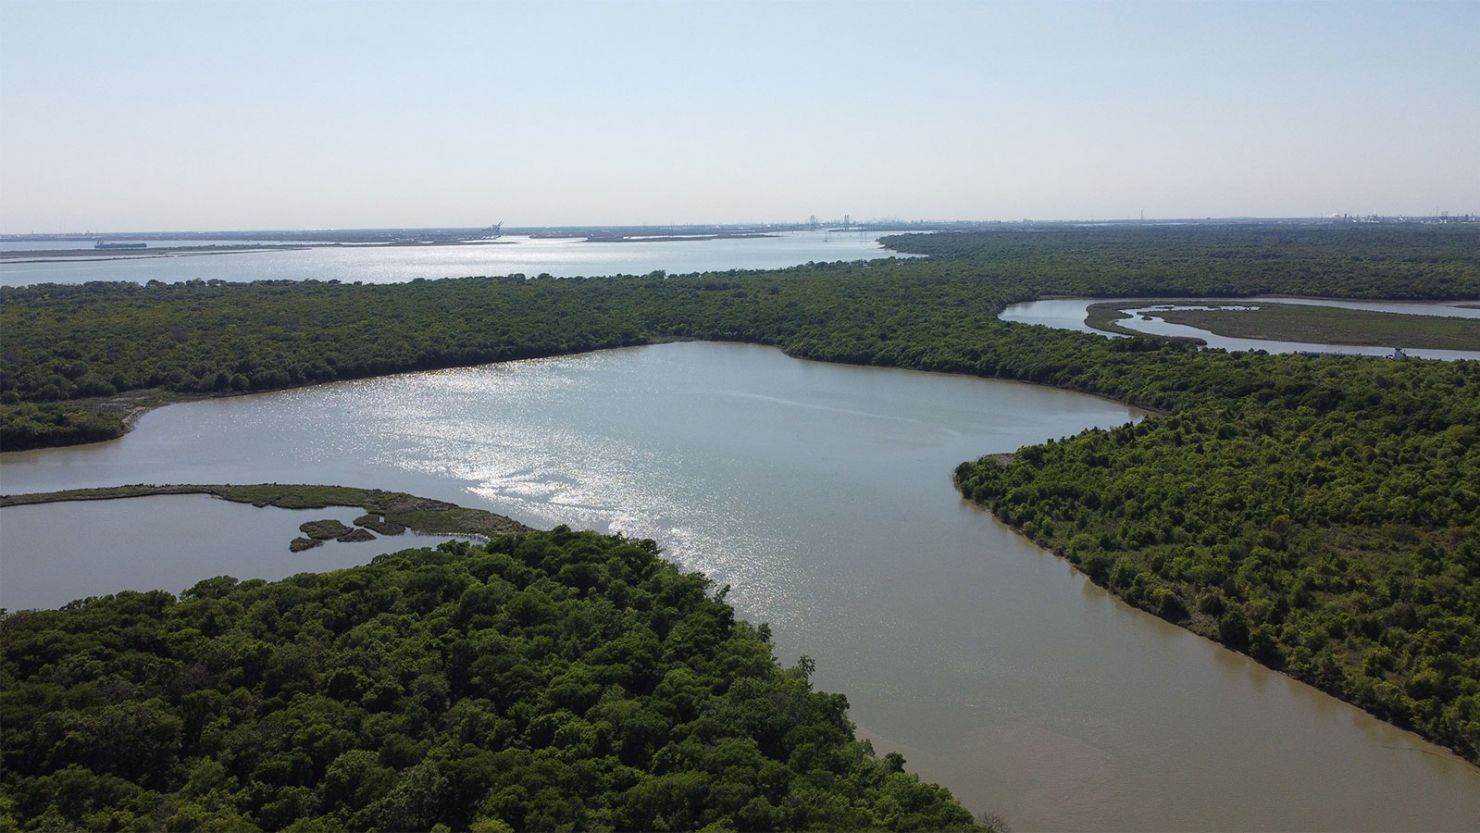 Lake Henry Doyle is the new name of a Texas lake after a federal board approved renaming 16 geographic sites that used the word "Negro."